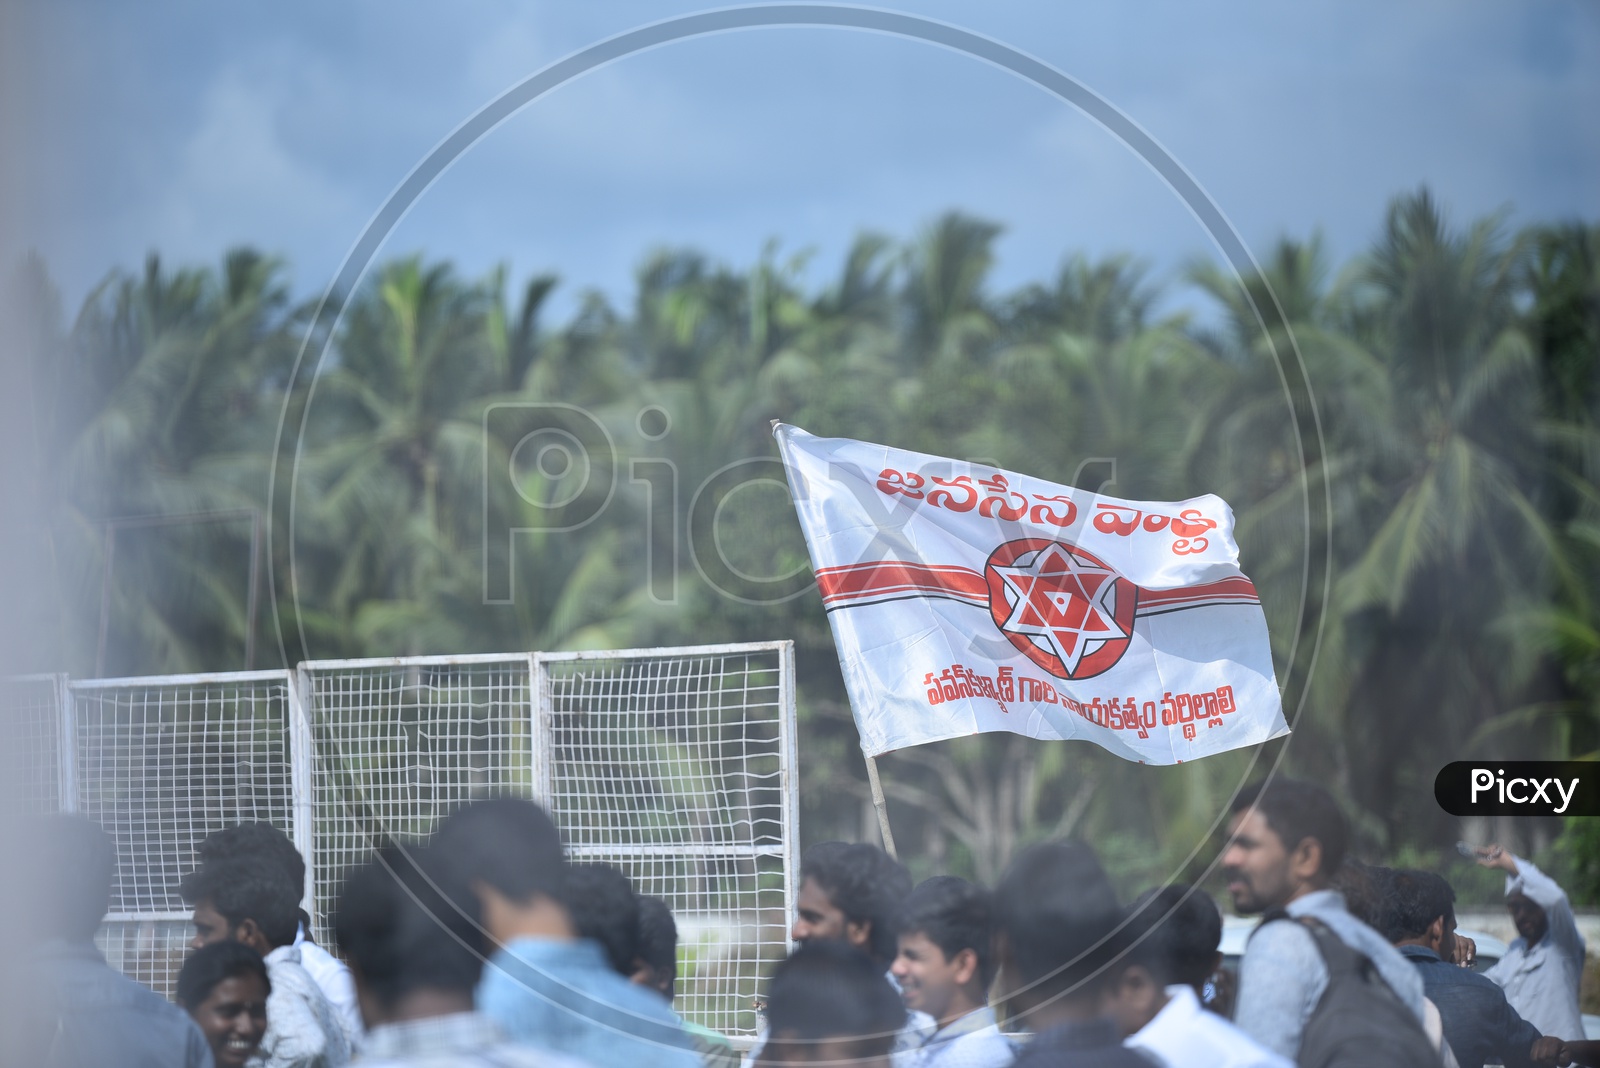 Jana sena party supporters holding the party flag at an election campaign